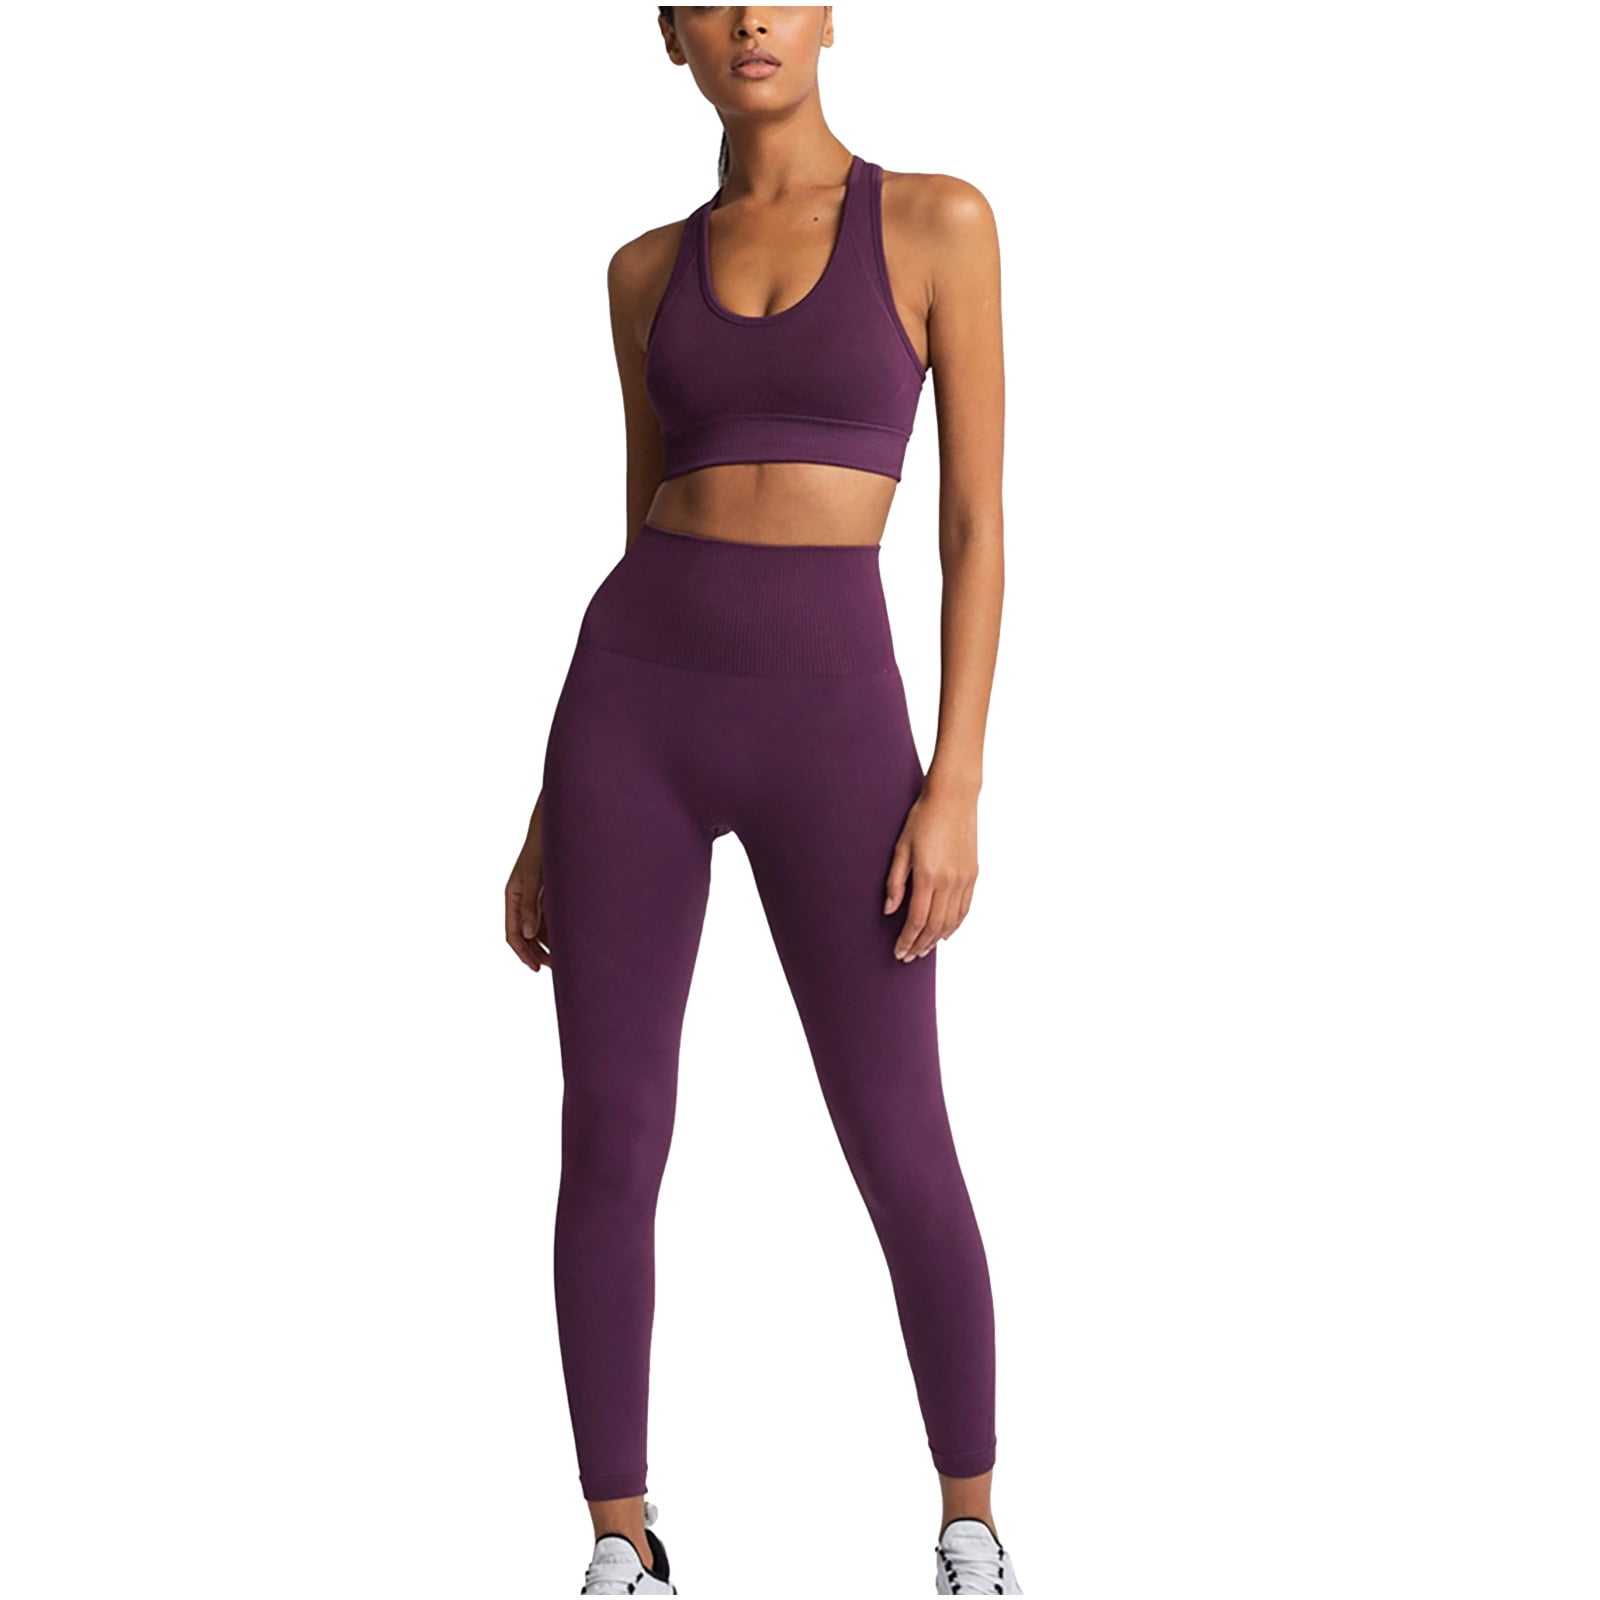 Cotonie Workout Sets for Women Sport Bra Seamless Crop Tops Leggings  Matching 2 Pieces Outfits, Two Piece Yoga Bra Workout Outfits 